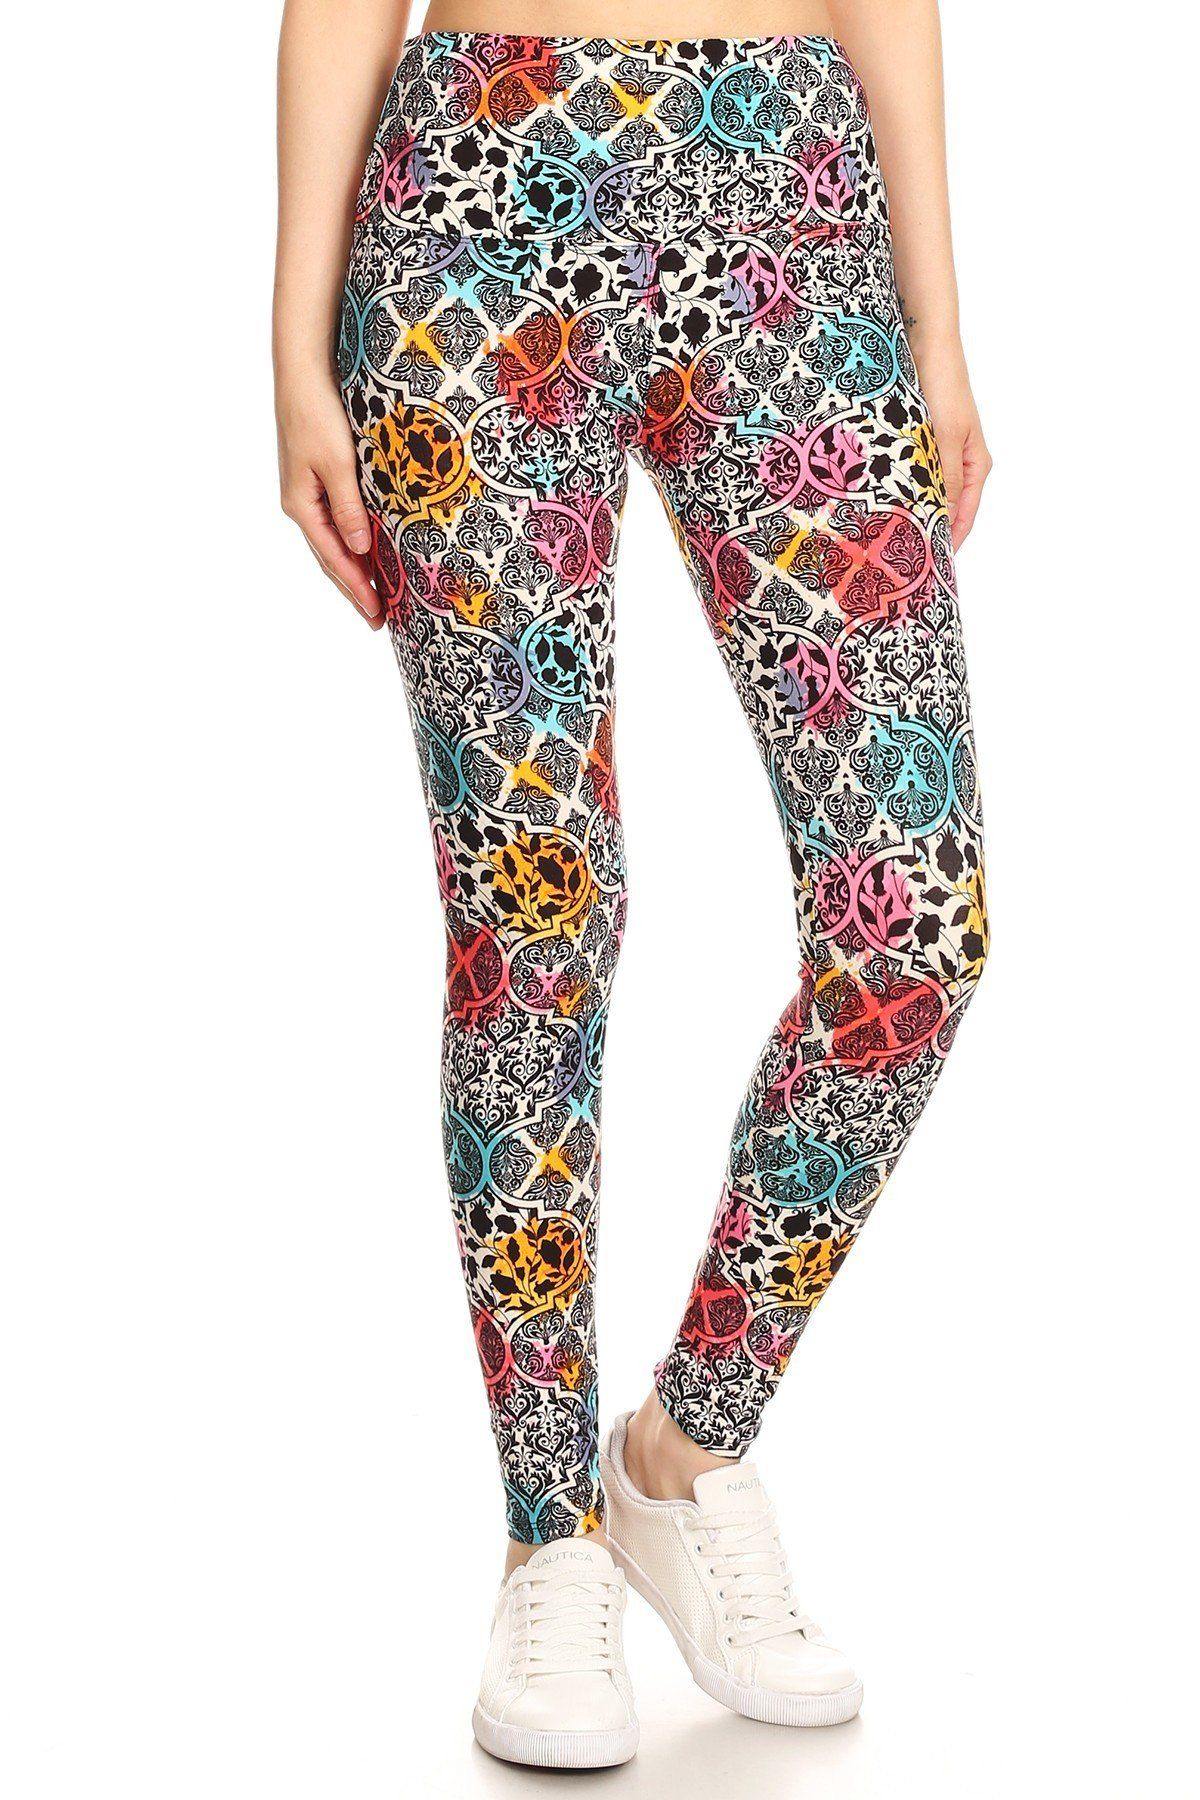 5-inch Long Yoga Style Banded Lined Damask Pattern Printed Knit Legging With High Waist - Pearlara